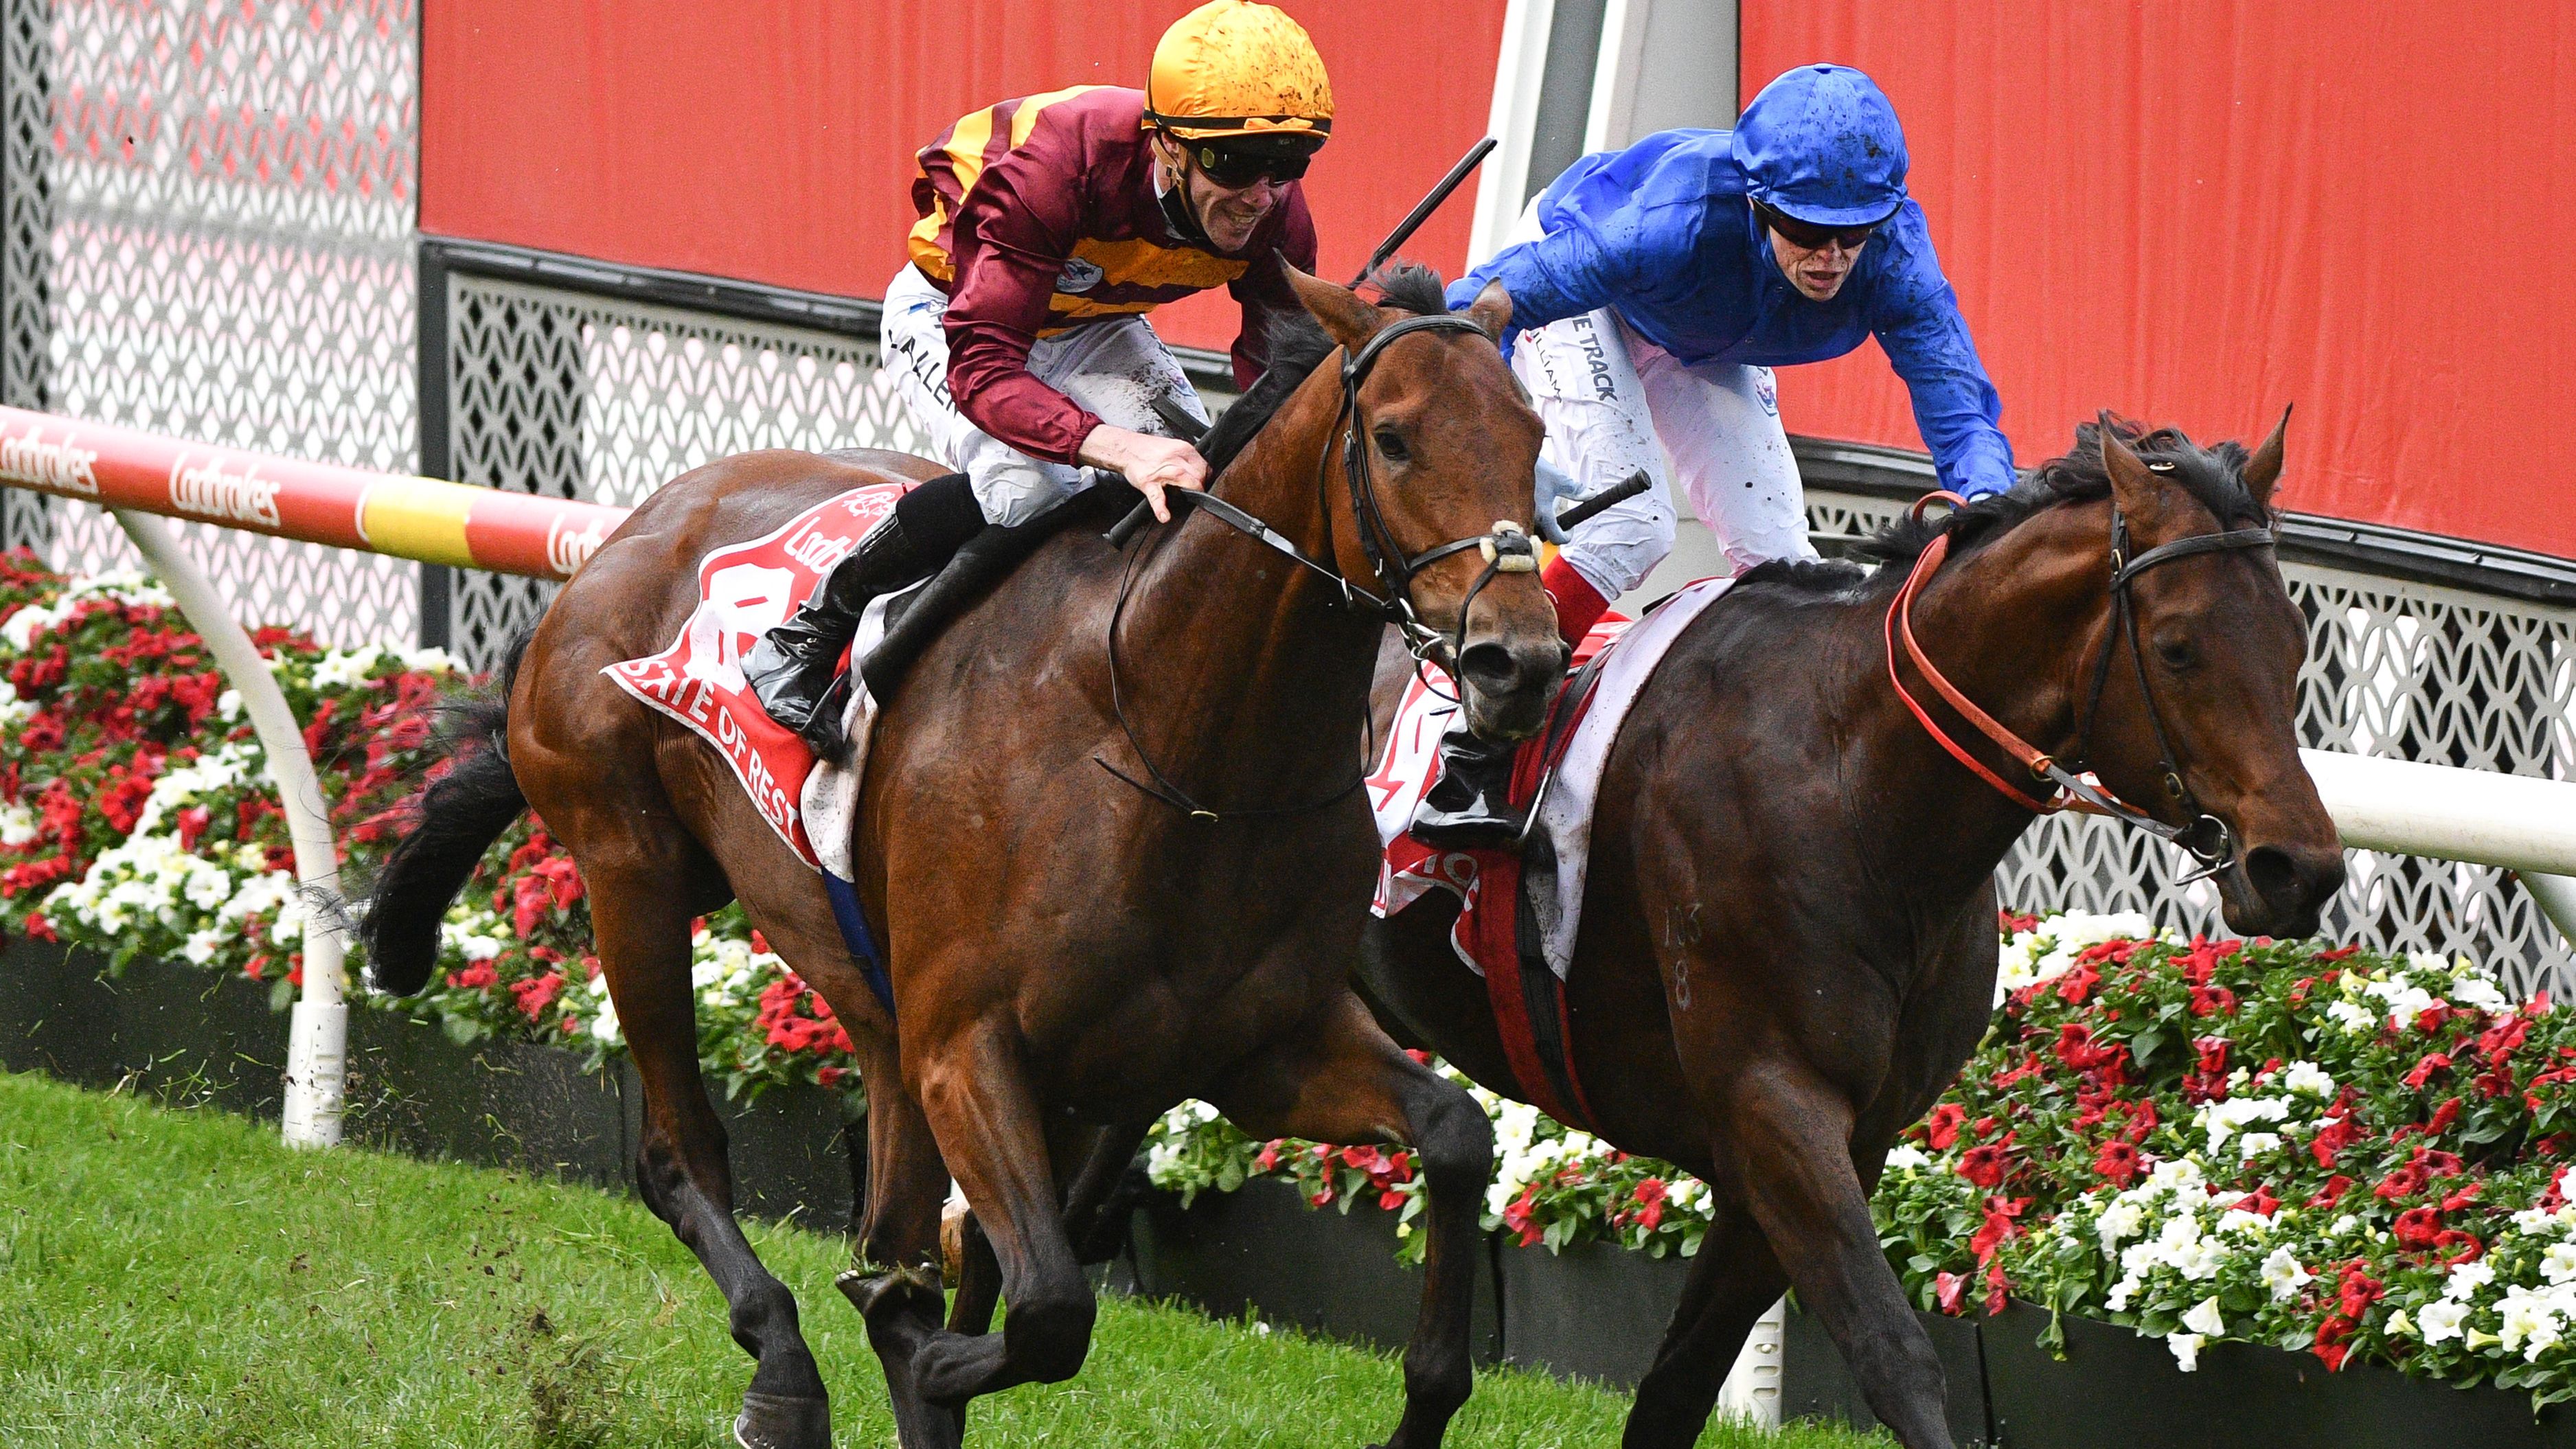 John Allen riding State Of Rest defeats Craig Williams riding Anamoe in the Cox Plate.